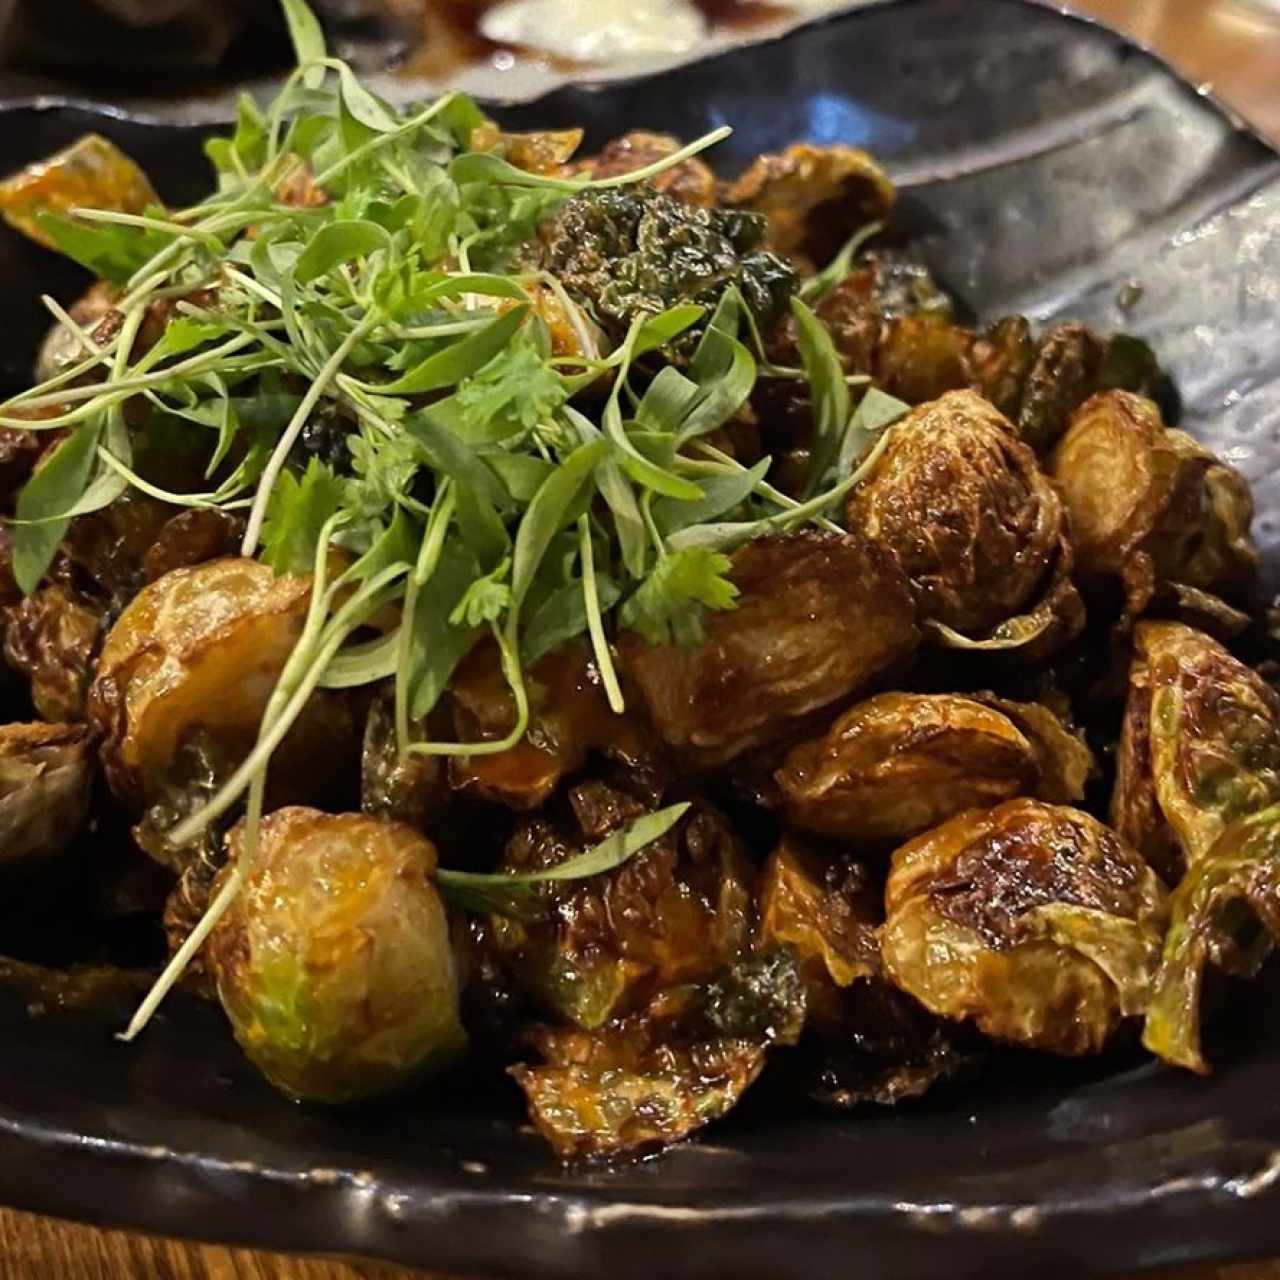 Entrees - Crispy Brussels Sprout